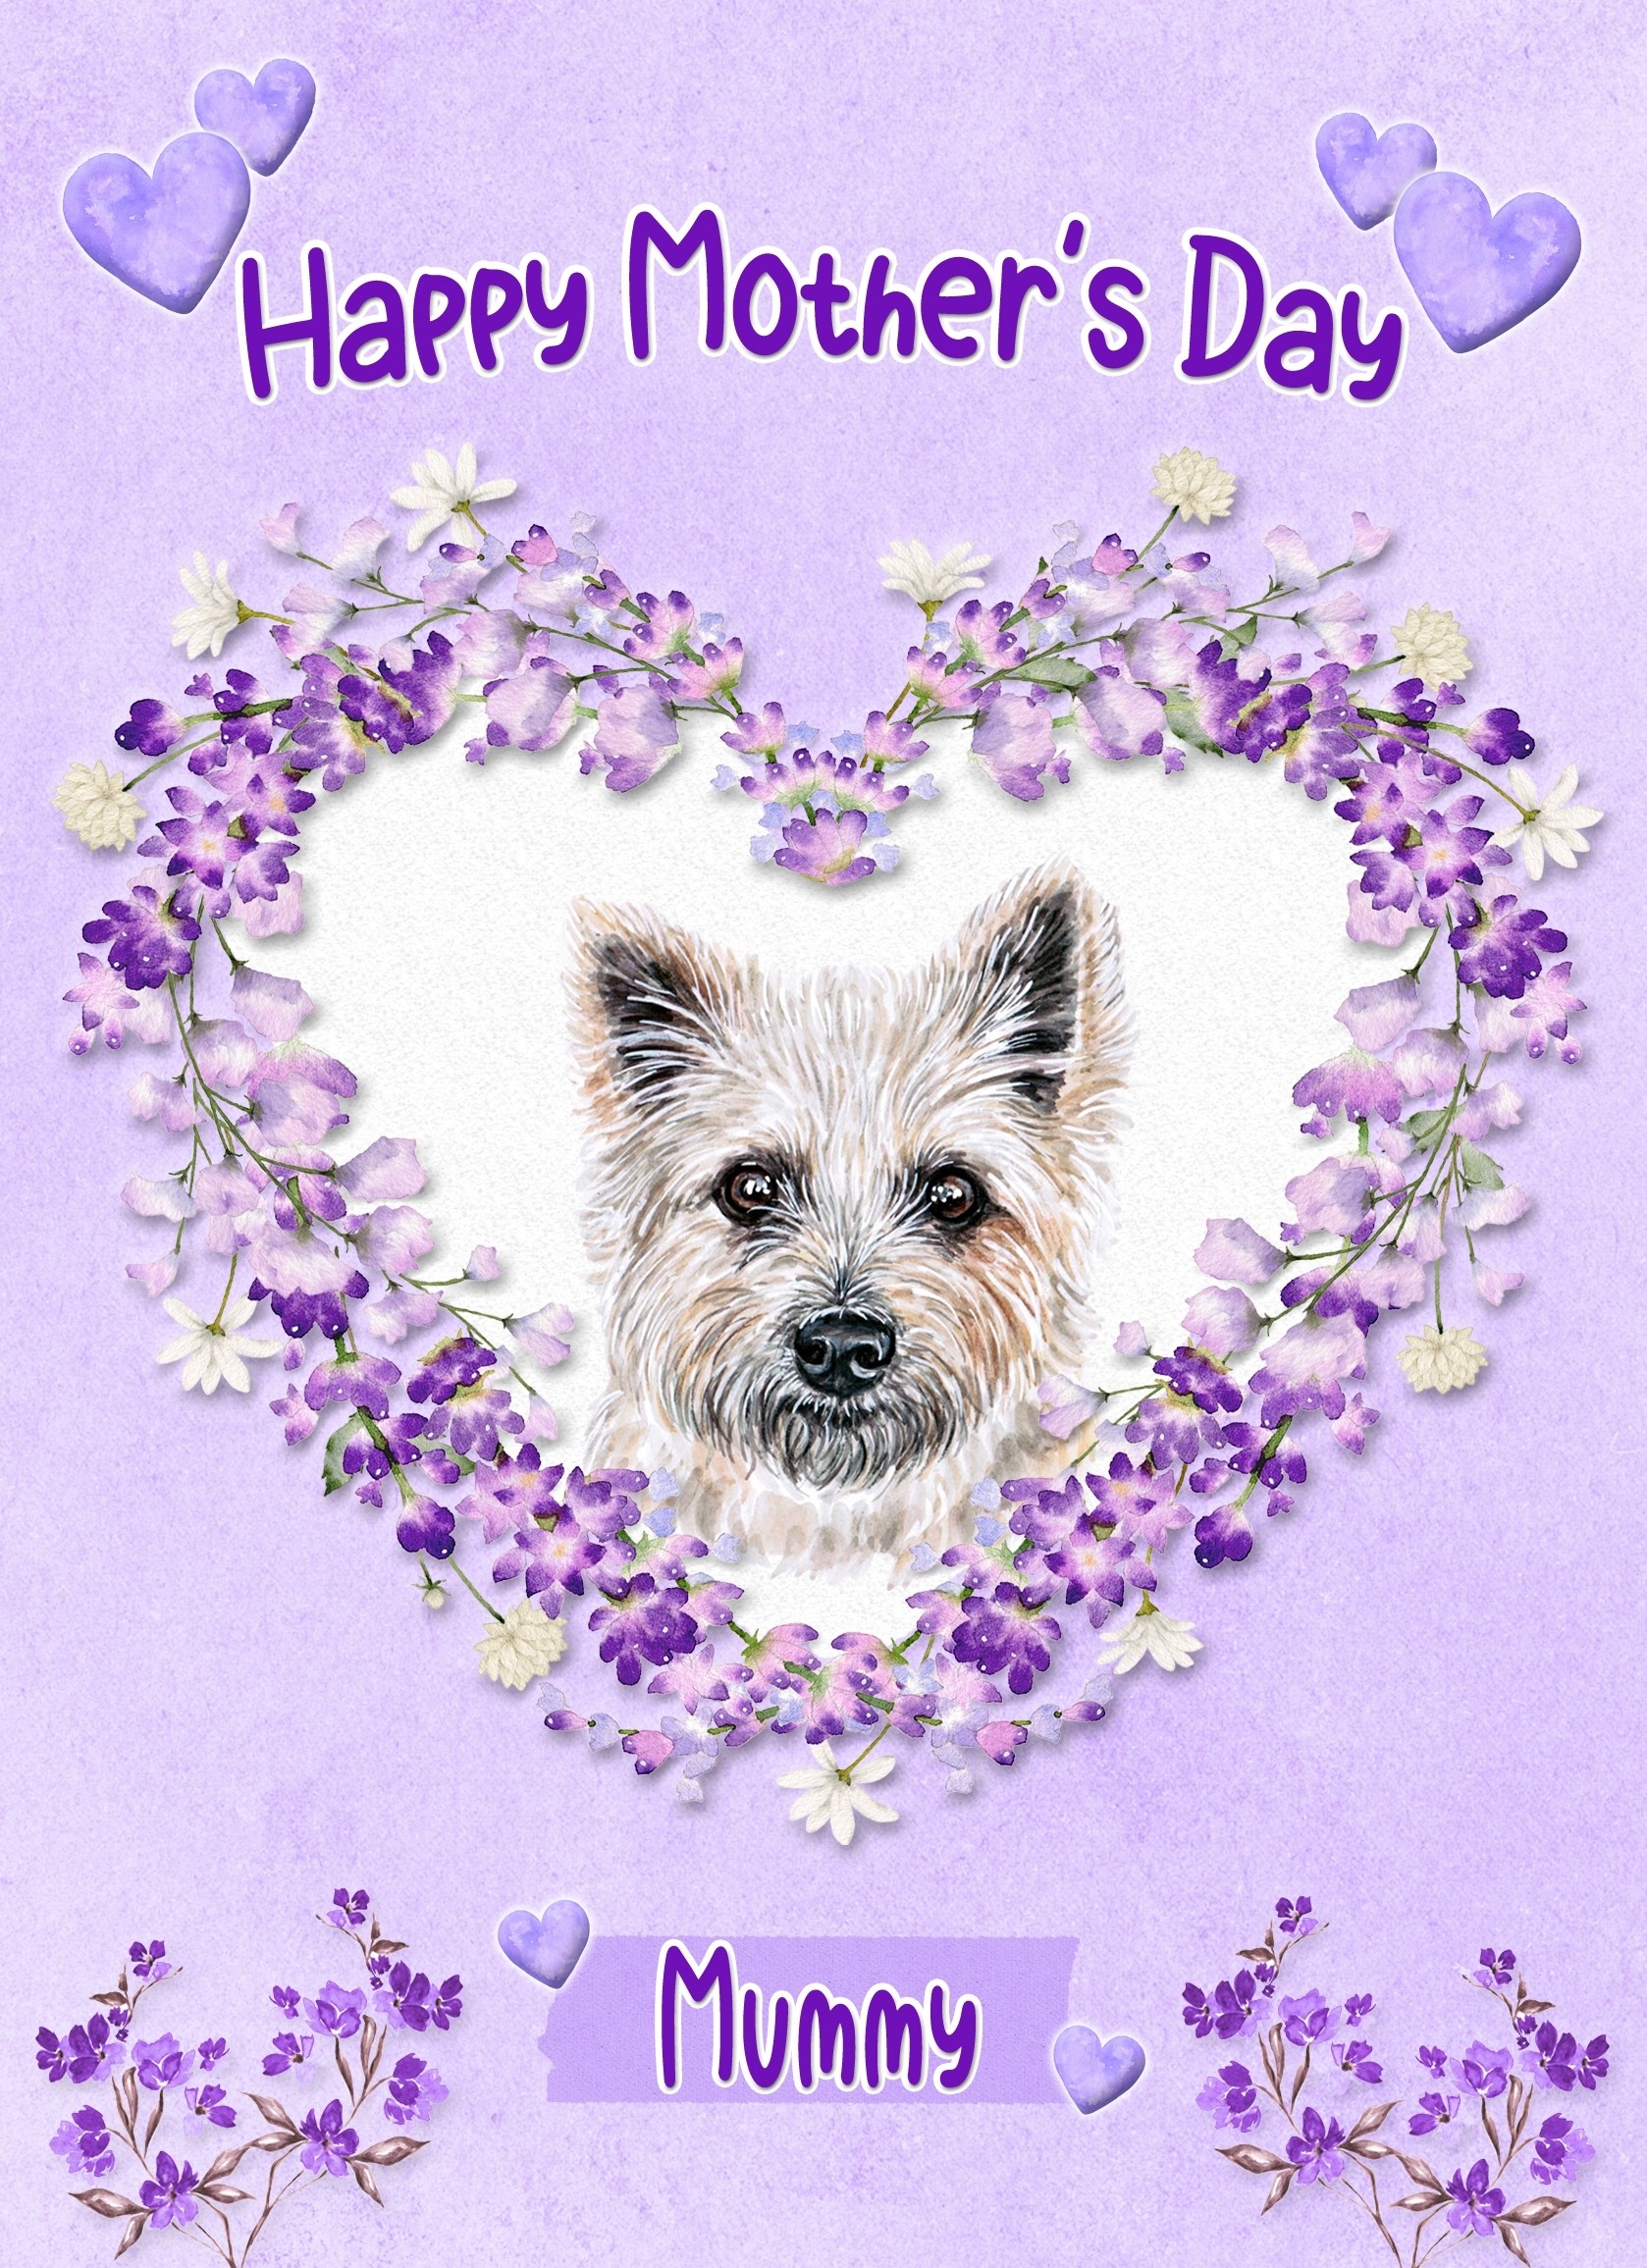 Cairn Terrier Dog Mothers Day Card (Happy Mothers, Mummy)